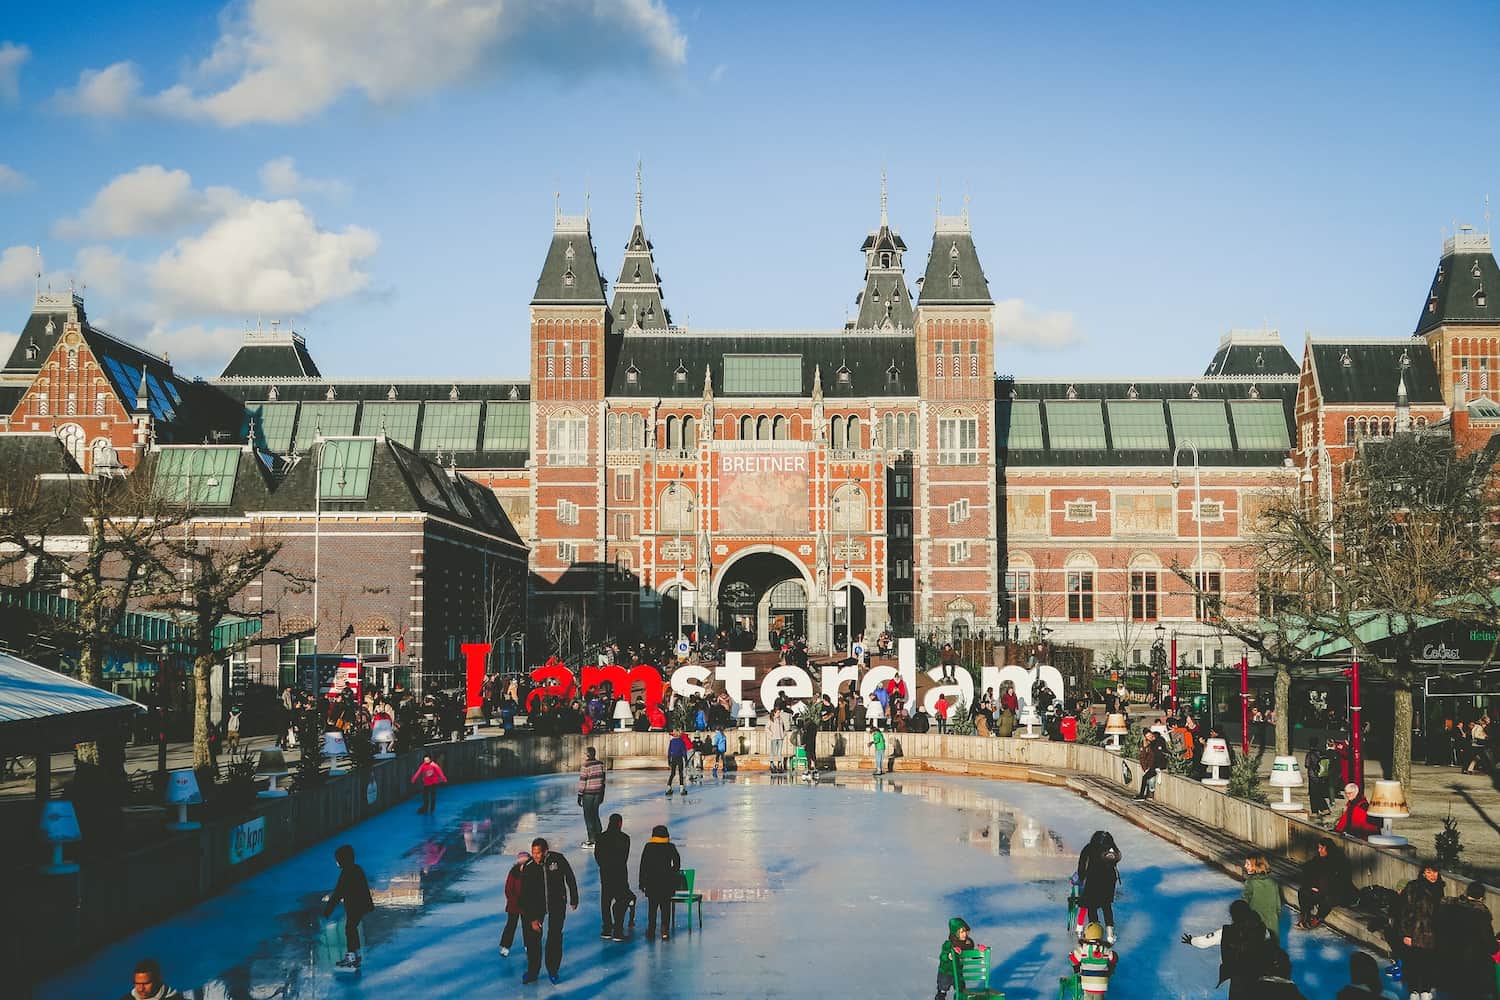 Amsterdam as one of the smart cities of the world using technology to advance itself